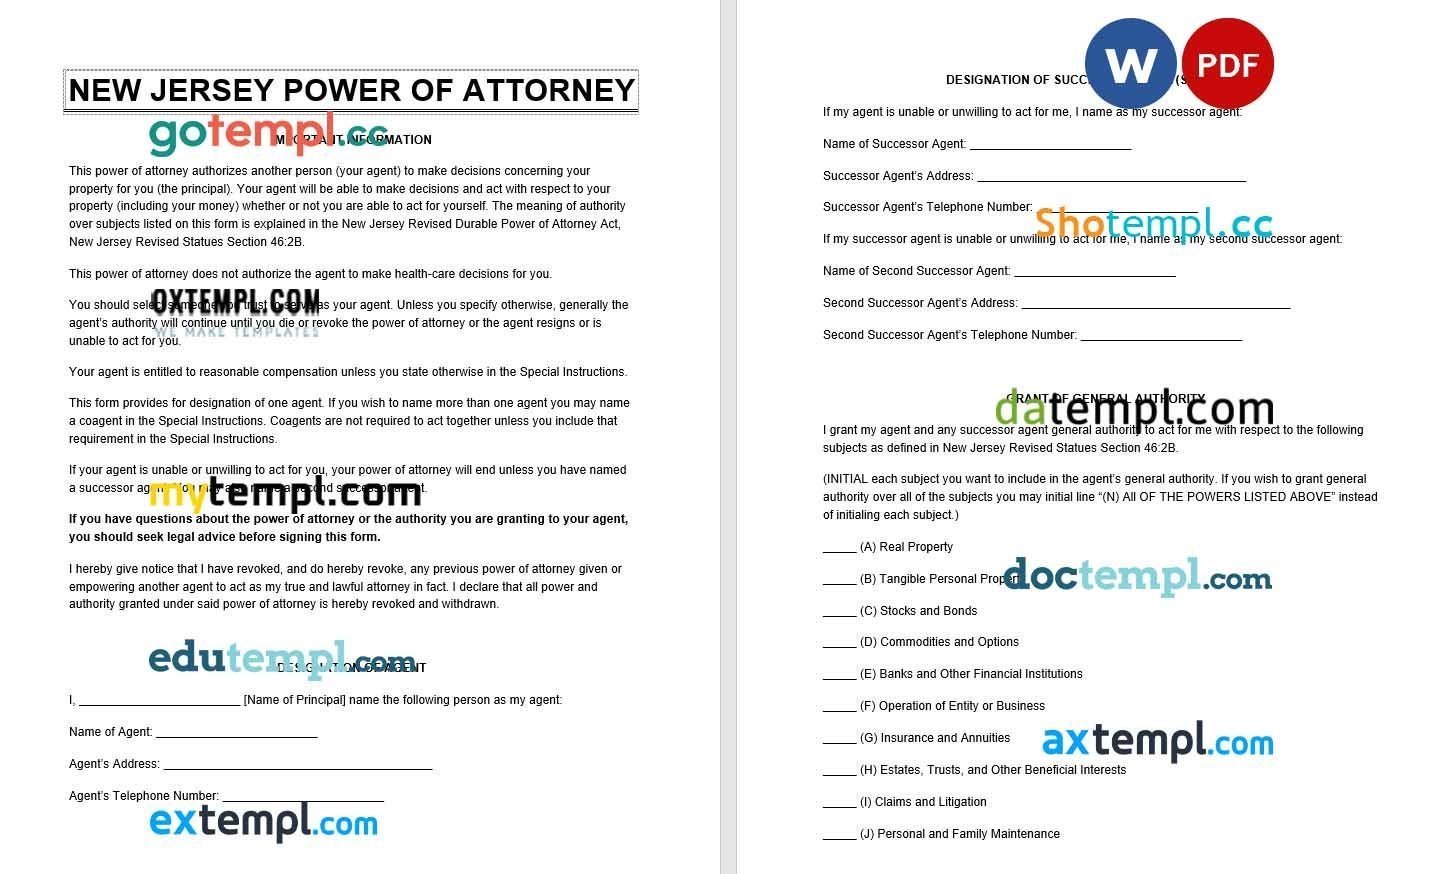 New Jersey Power of Attorney example, fully editable